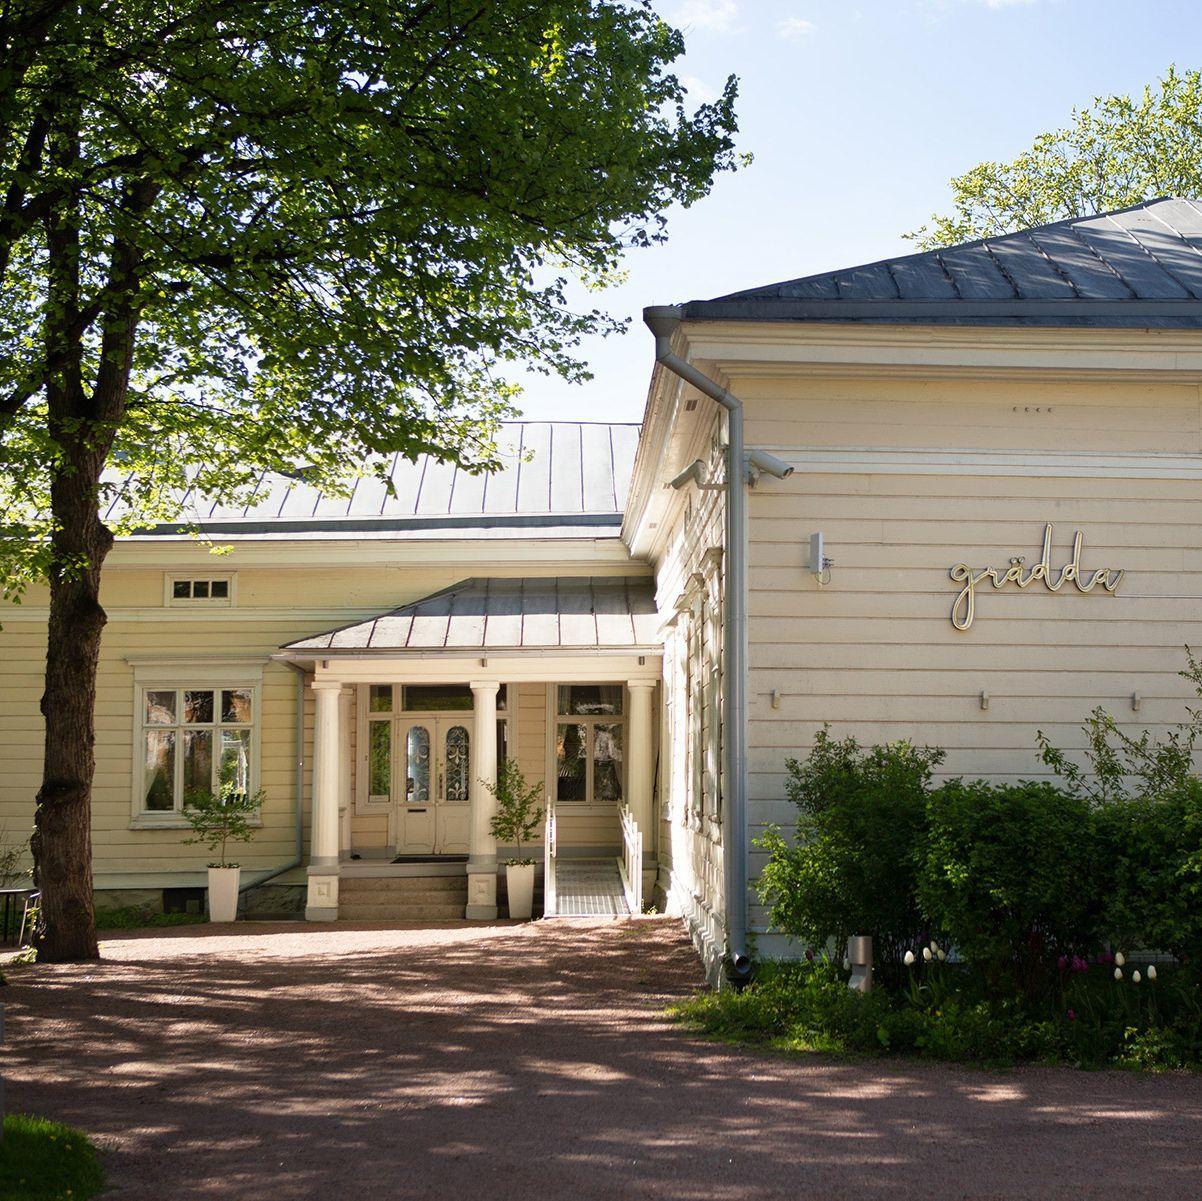 The cream-coloured building of Restaurant Grädda, surrounded by greenery.